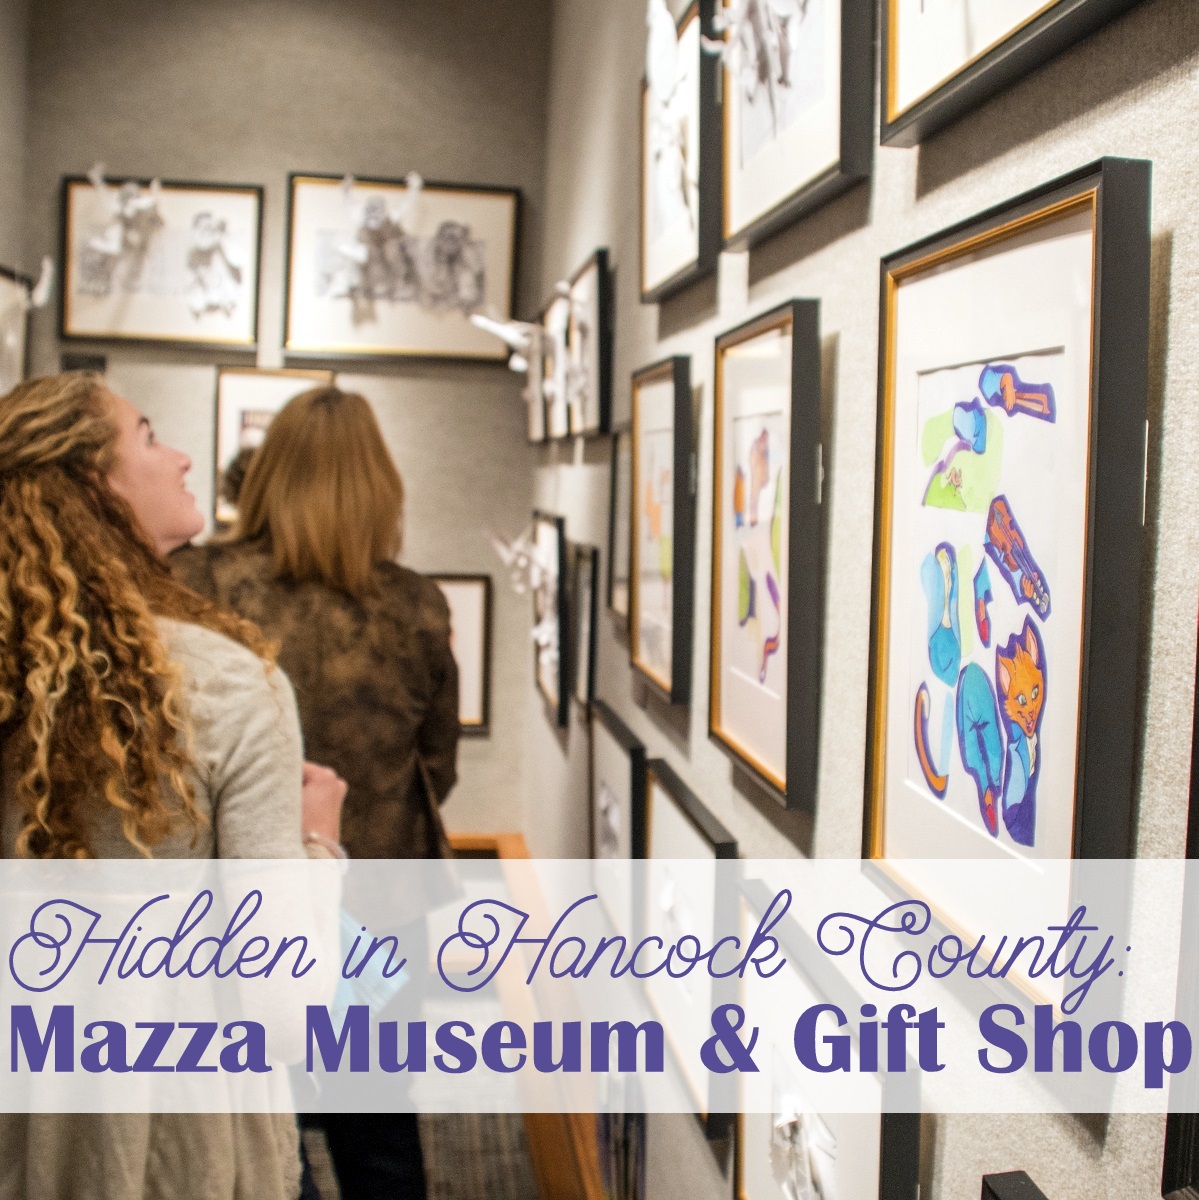 There are so many hidden treasures in Hancock County and the Mazza Museum and gift shop are one of them!  •  VisitFindlay.com